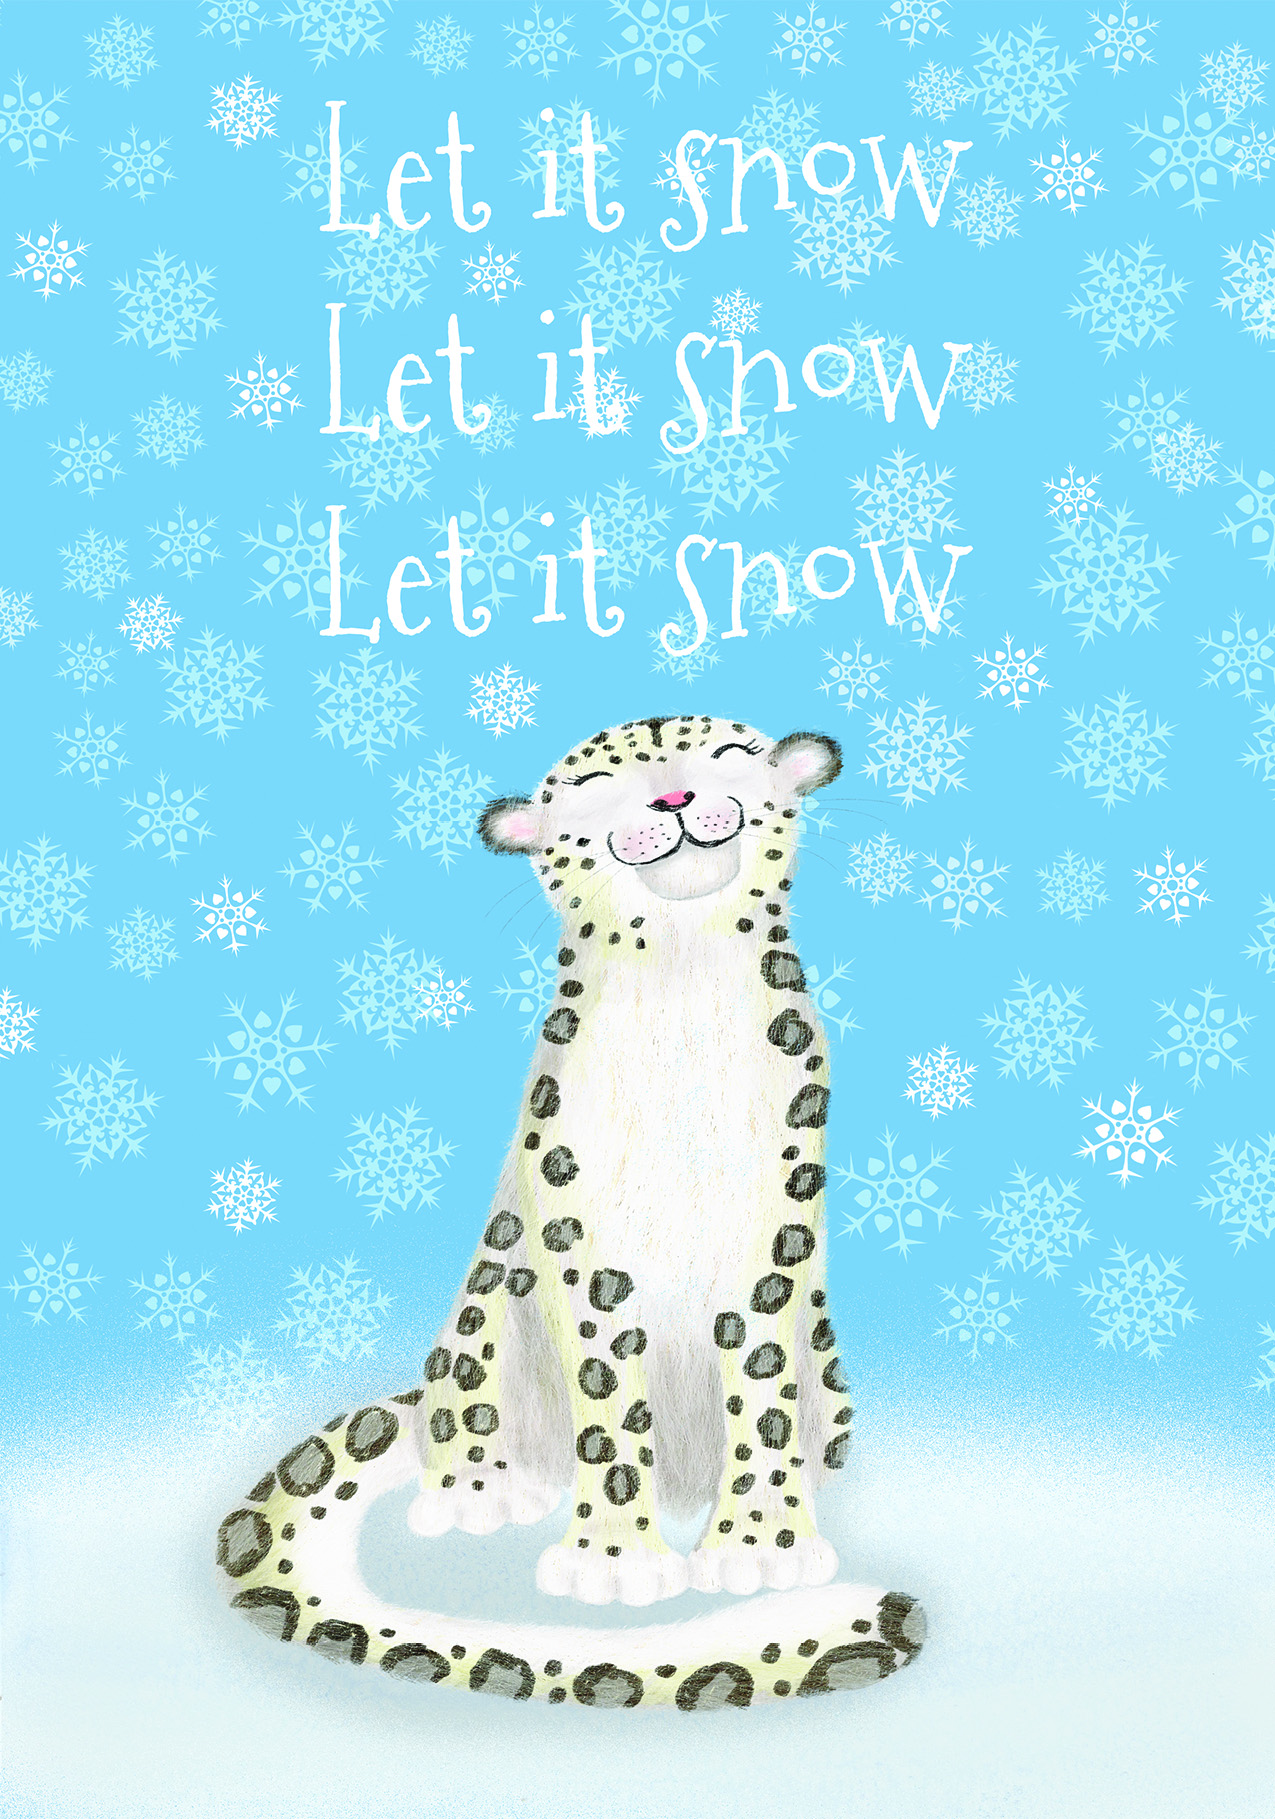 Snow leopard in a snowy landscape with Let it snow, let it snow, let it snow written above her